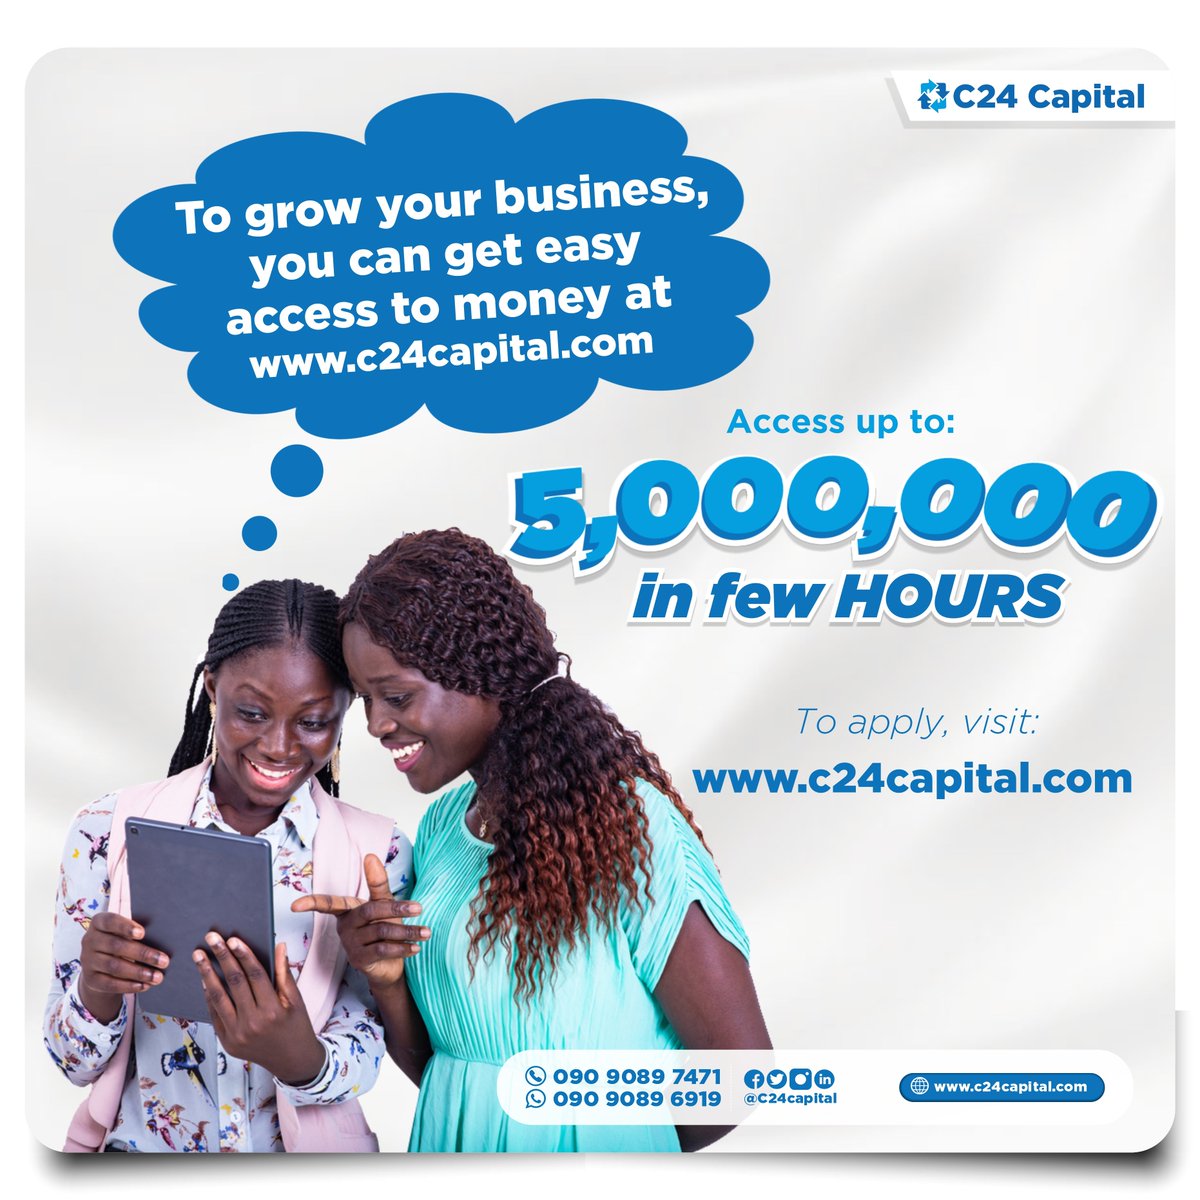 Apply for business and personal loans at c24capital.com

#LoanInLagos #C24Capital #fastloans #BusinessLoanInLagos